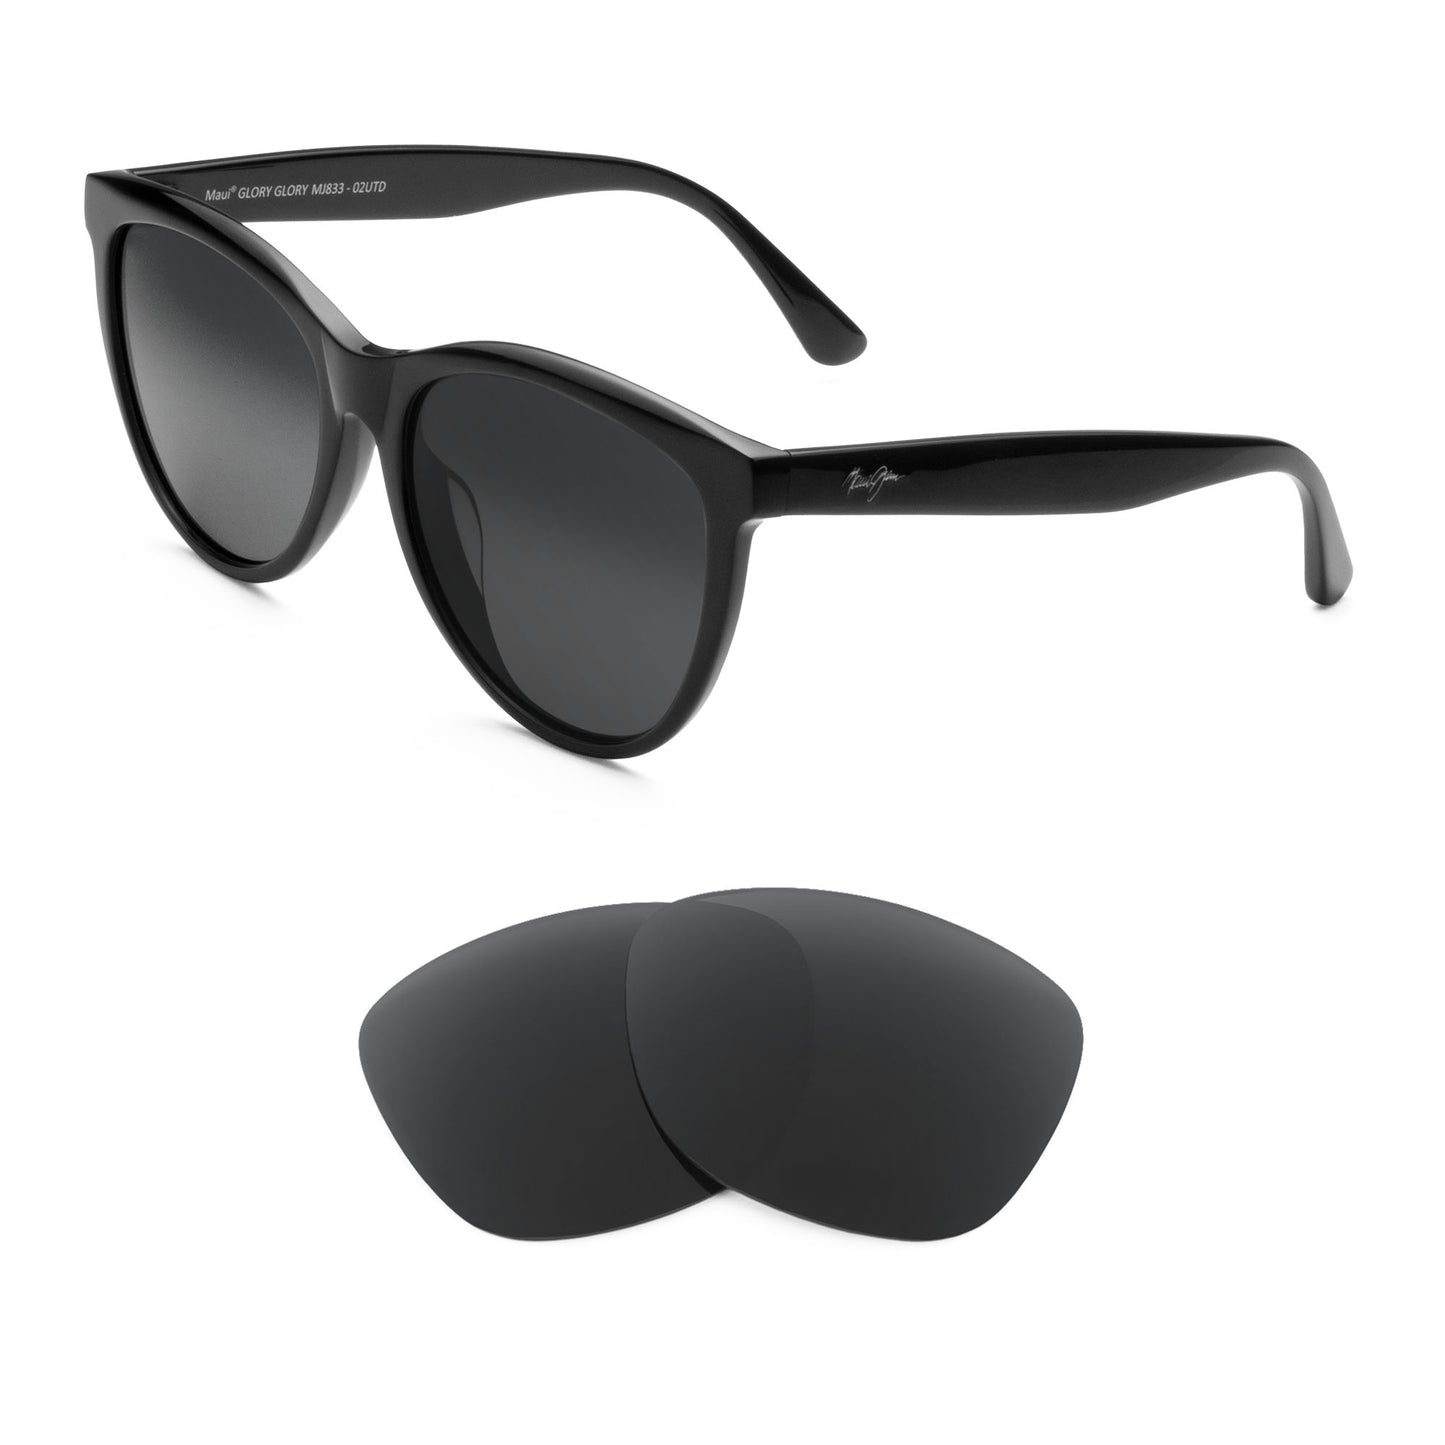 Maui Jim Glory Glory MJ833 sunglasses with replacement lenses